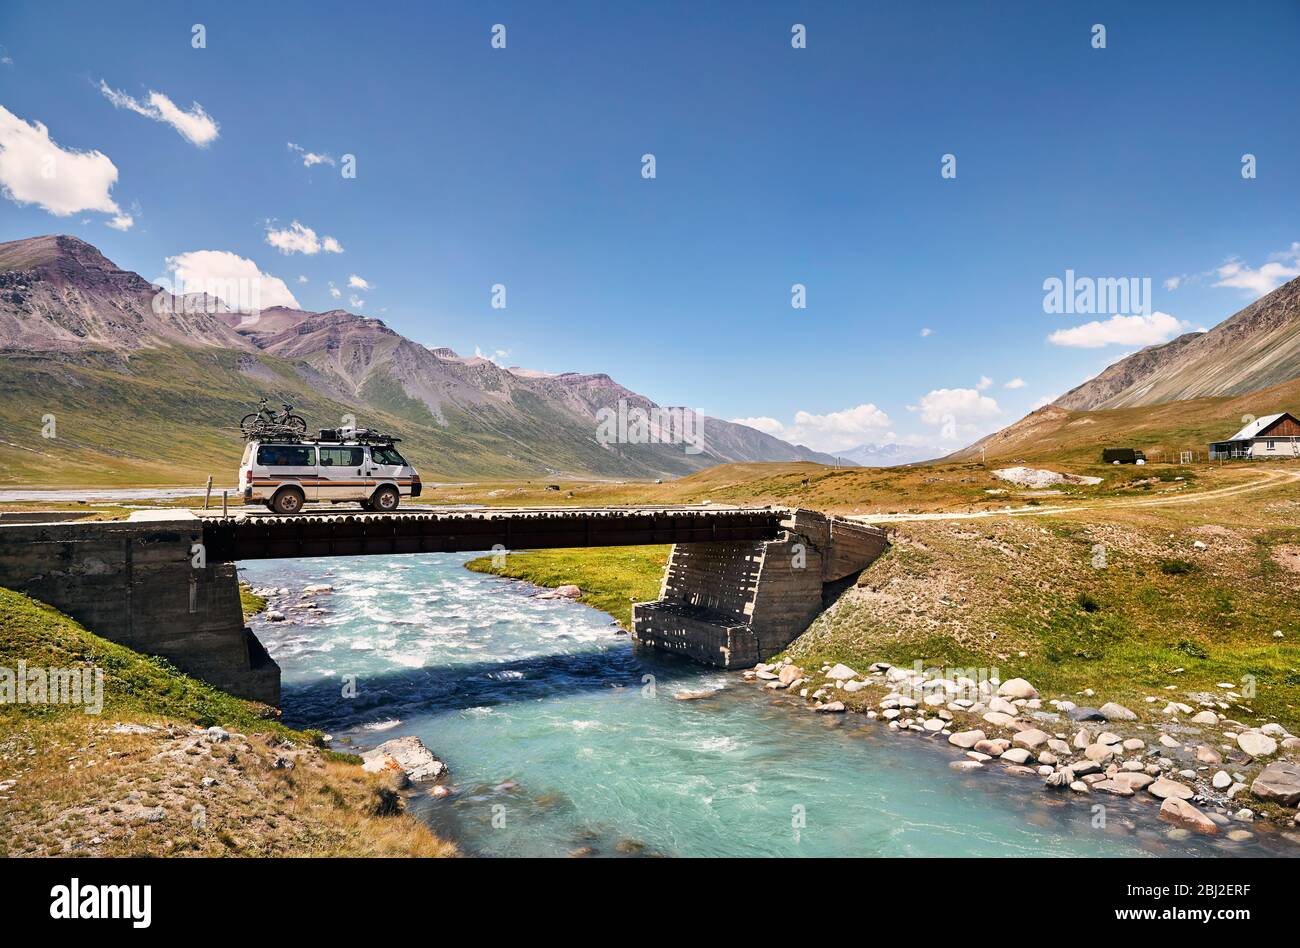 White van with bicycle on the roof is crossing river by bridge in the mountains in Kyrgyzstan Stock Photo